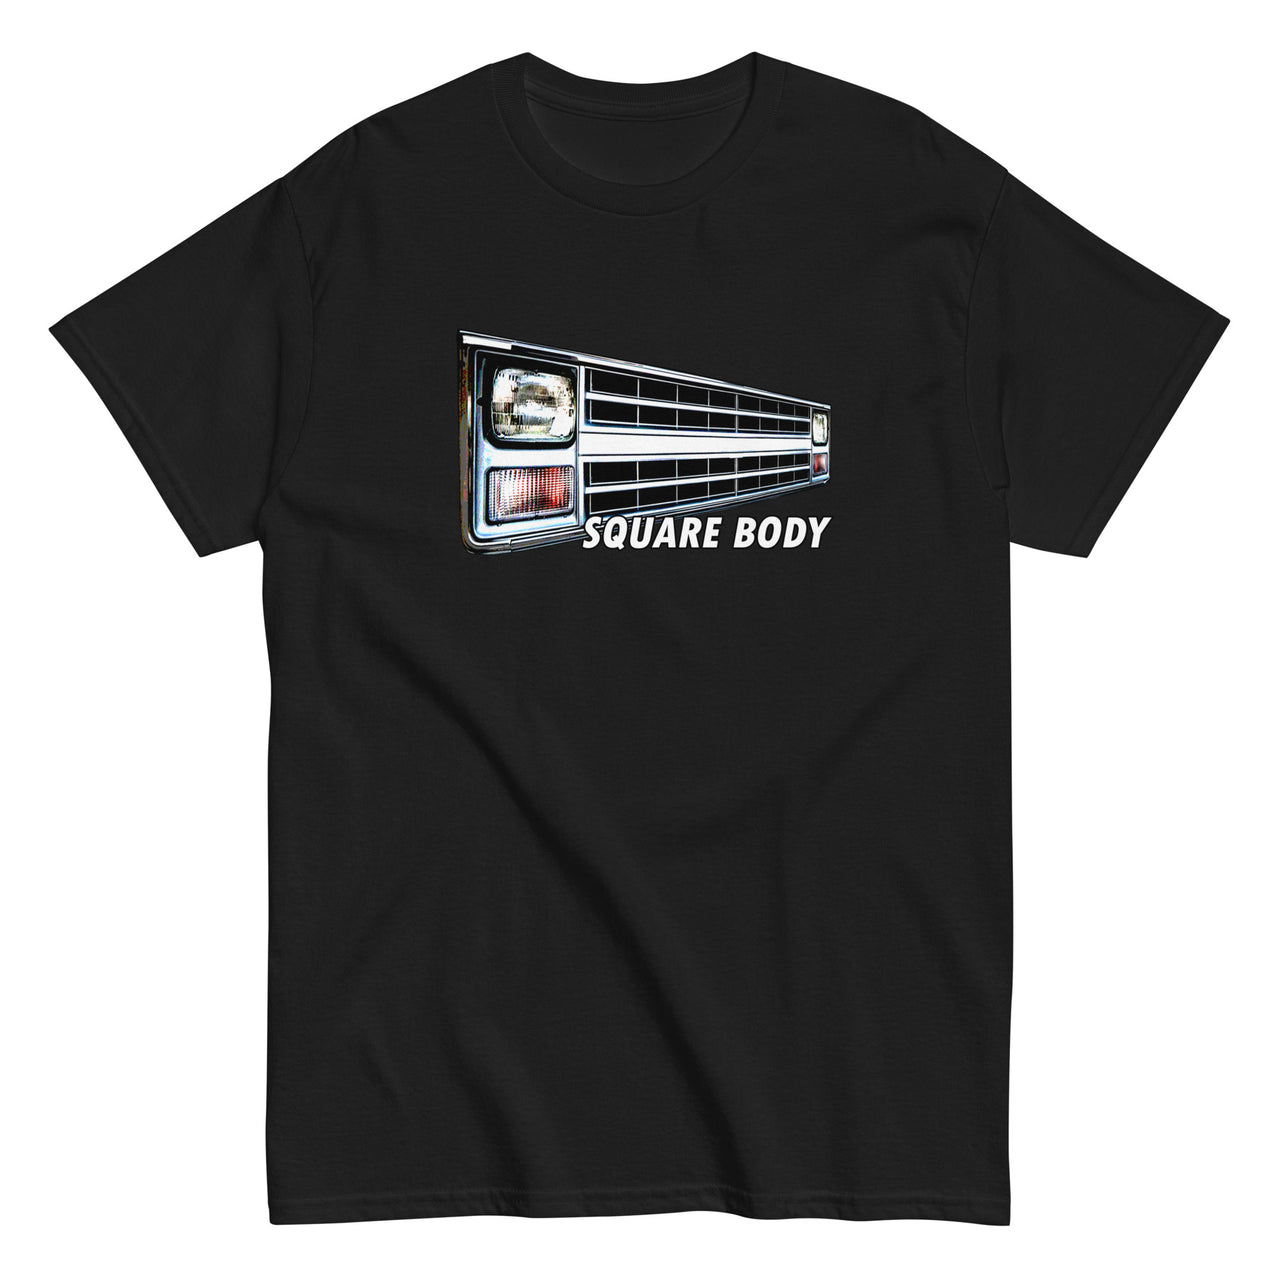 Square Body Angled 80s Truck Grille T-Shirt in black